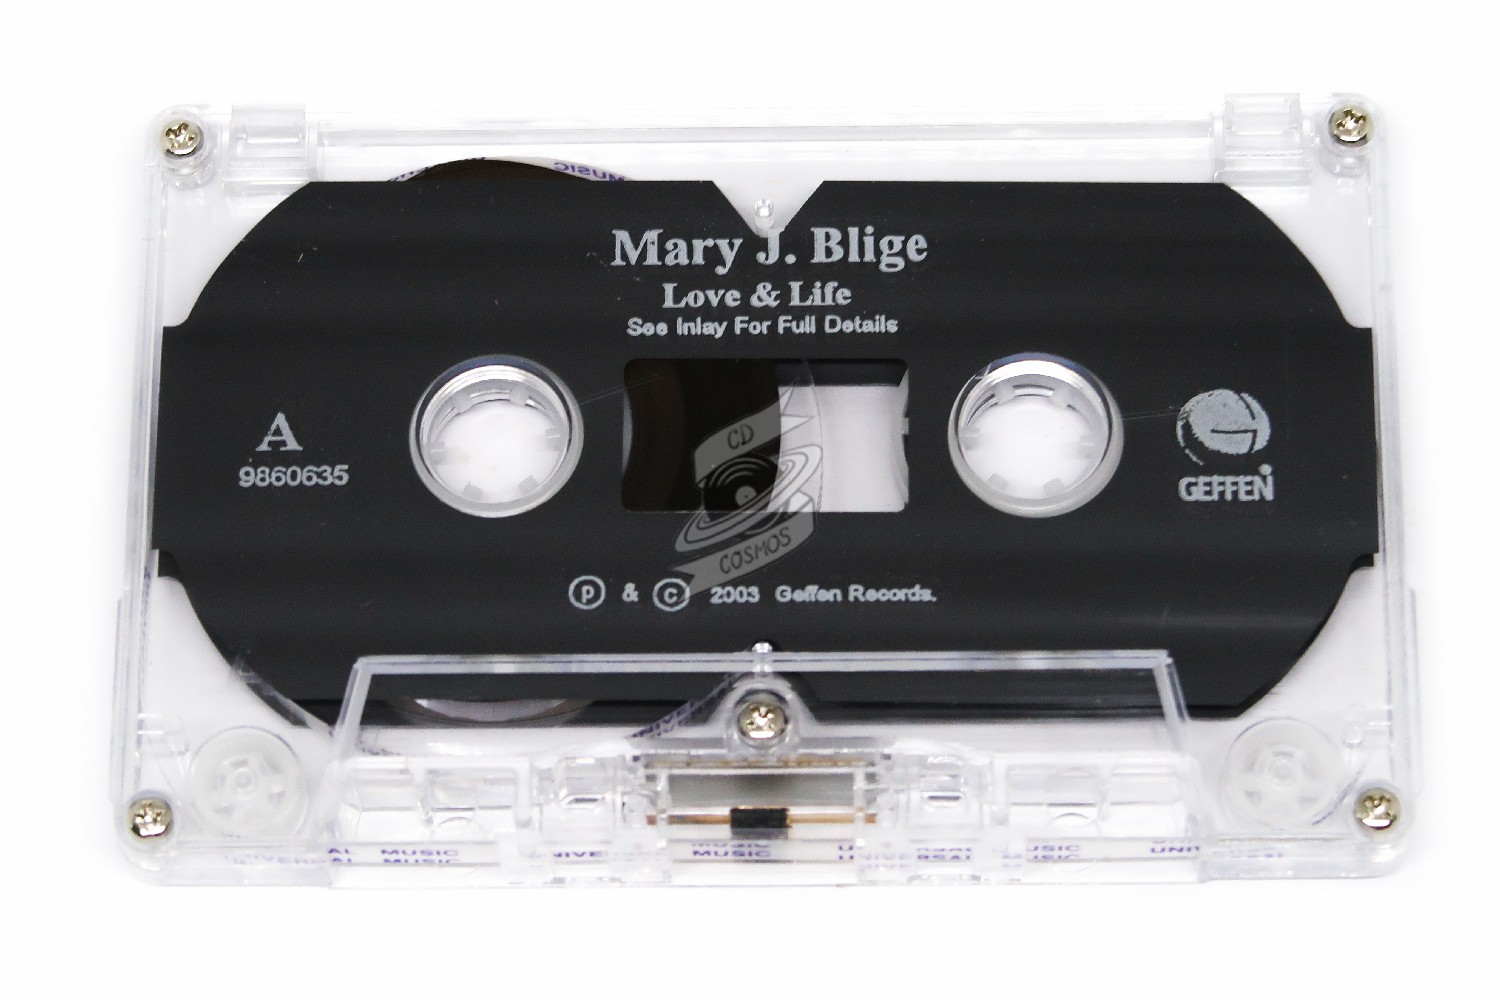 Real Love – Mary J. Blige Official Store